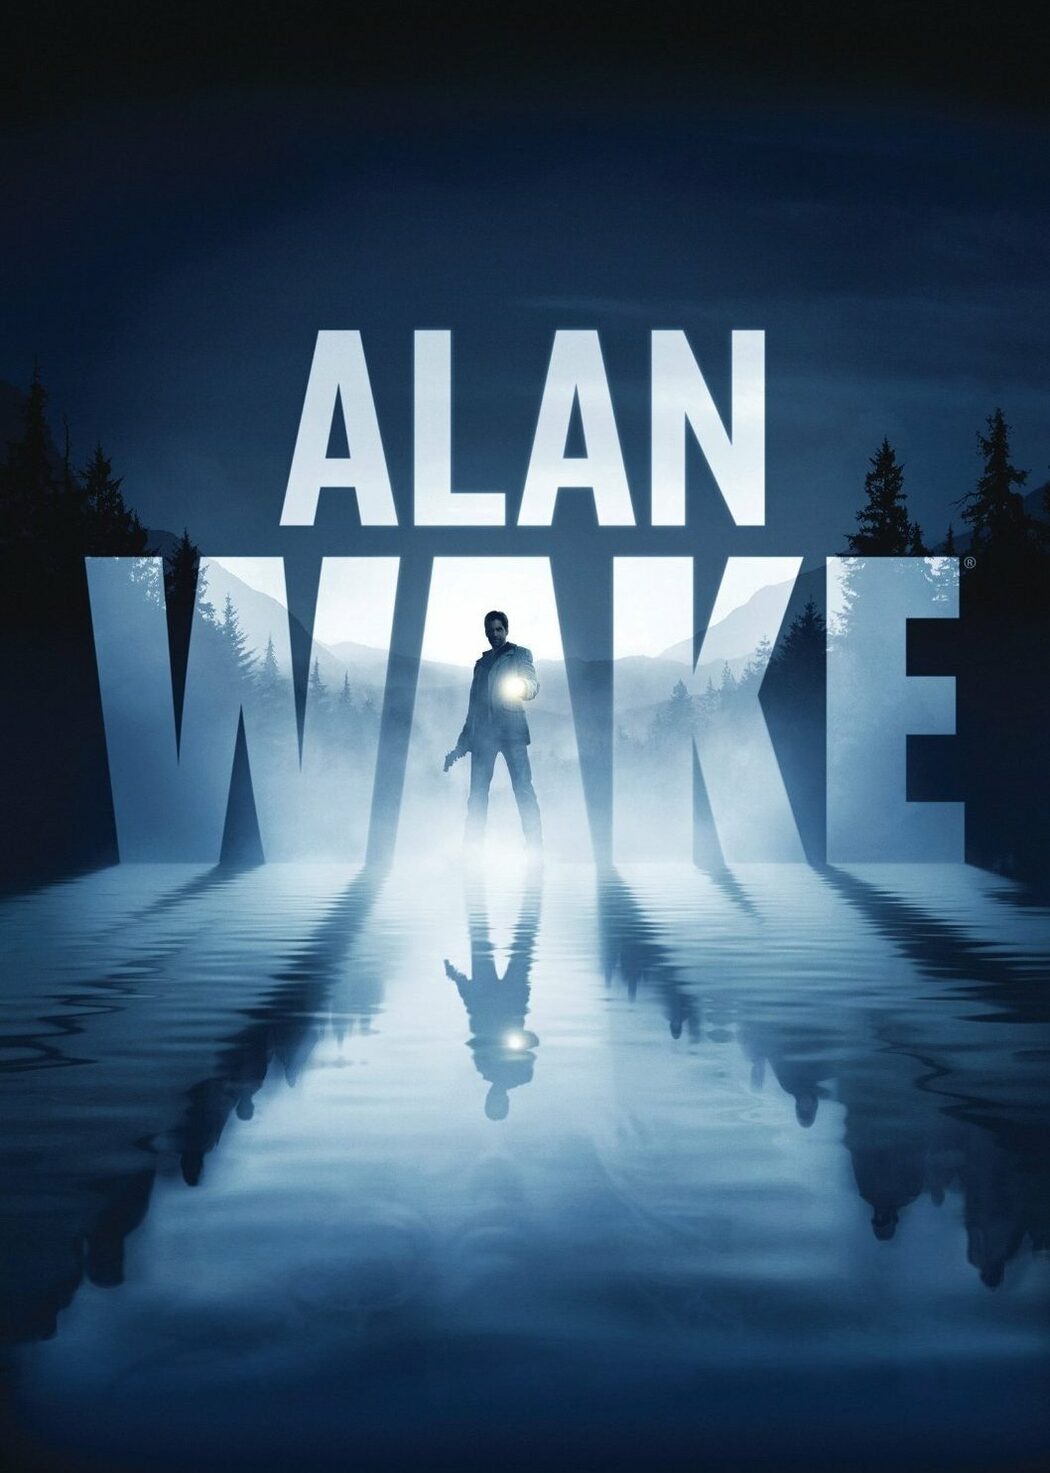 Alan Wake Remastered system requirements